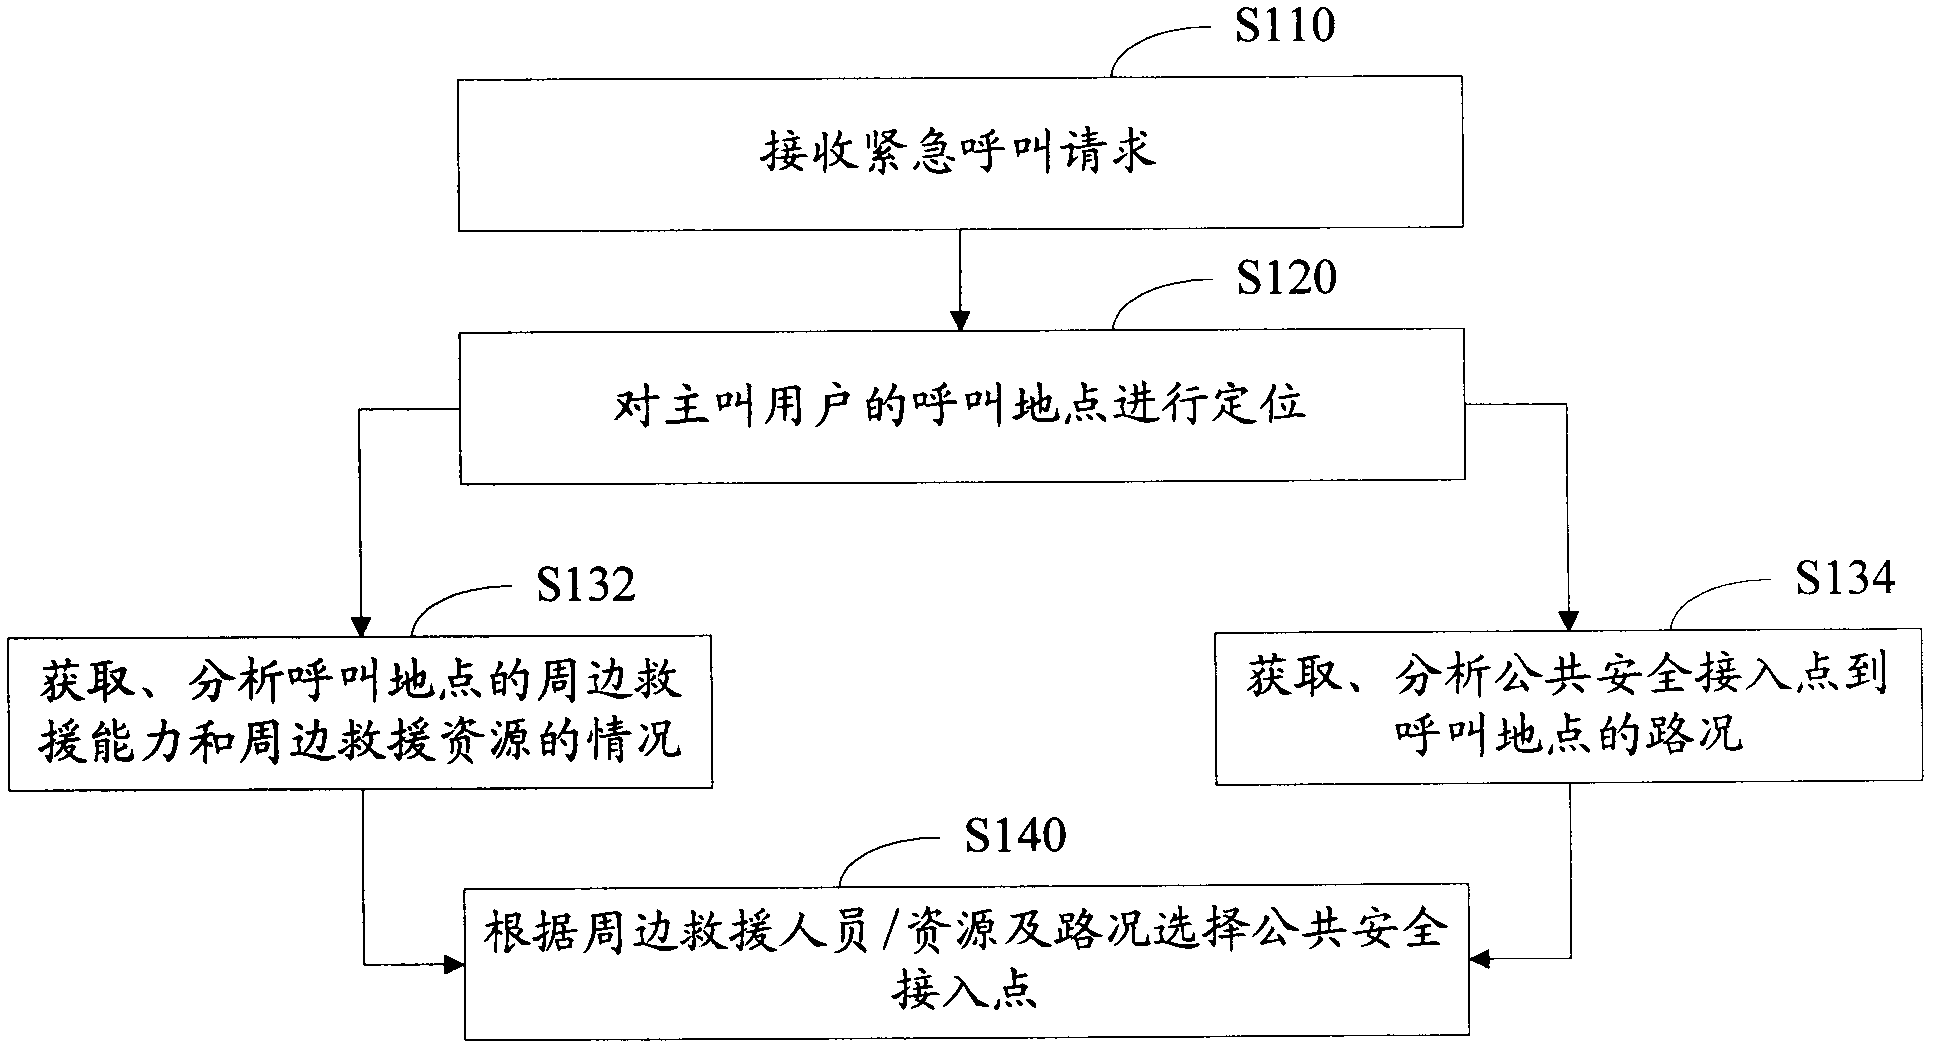 Method and system for selecting public safety access point for emergency call